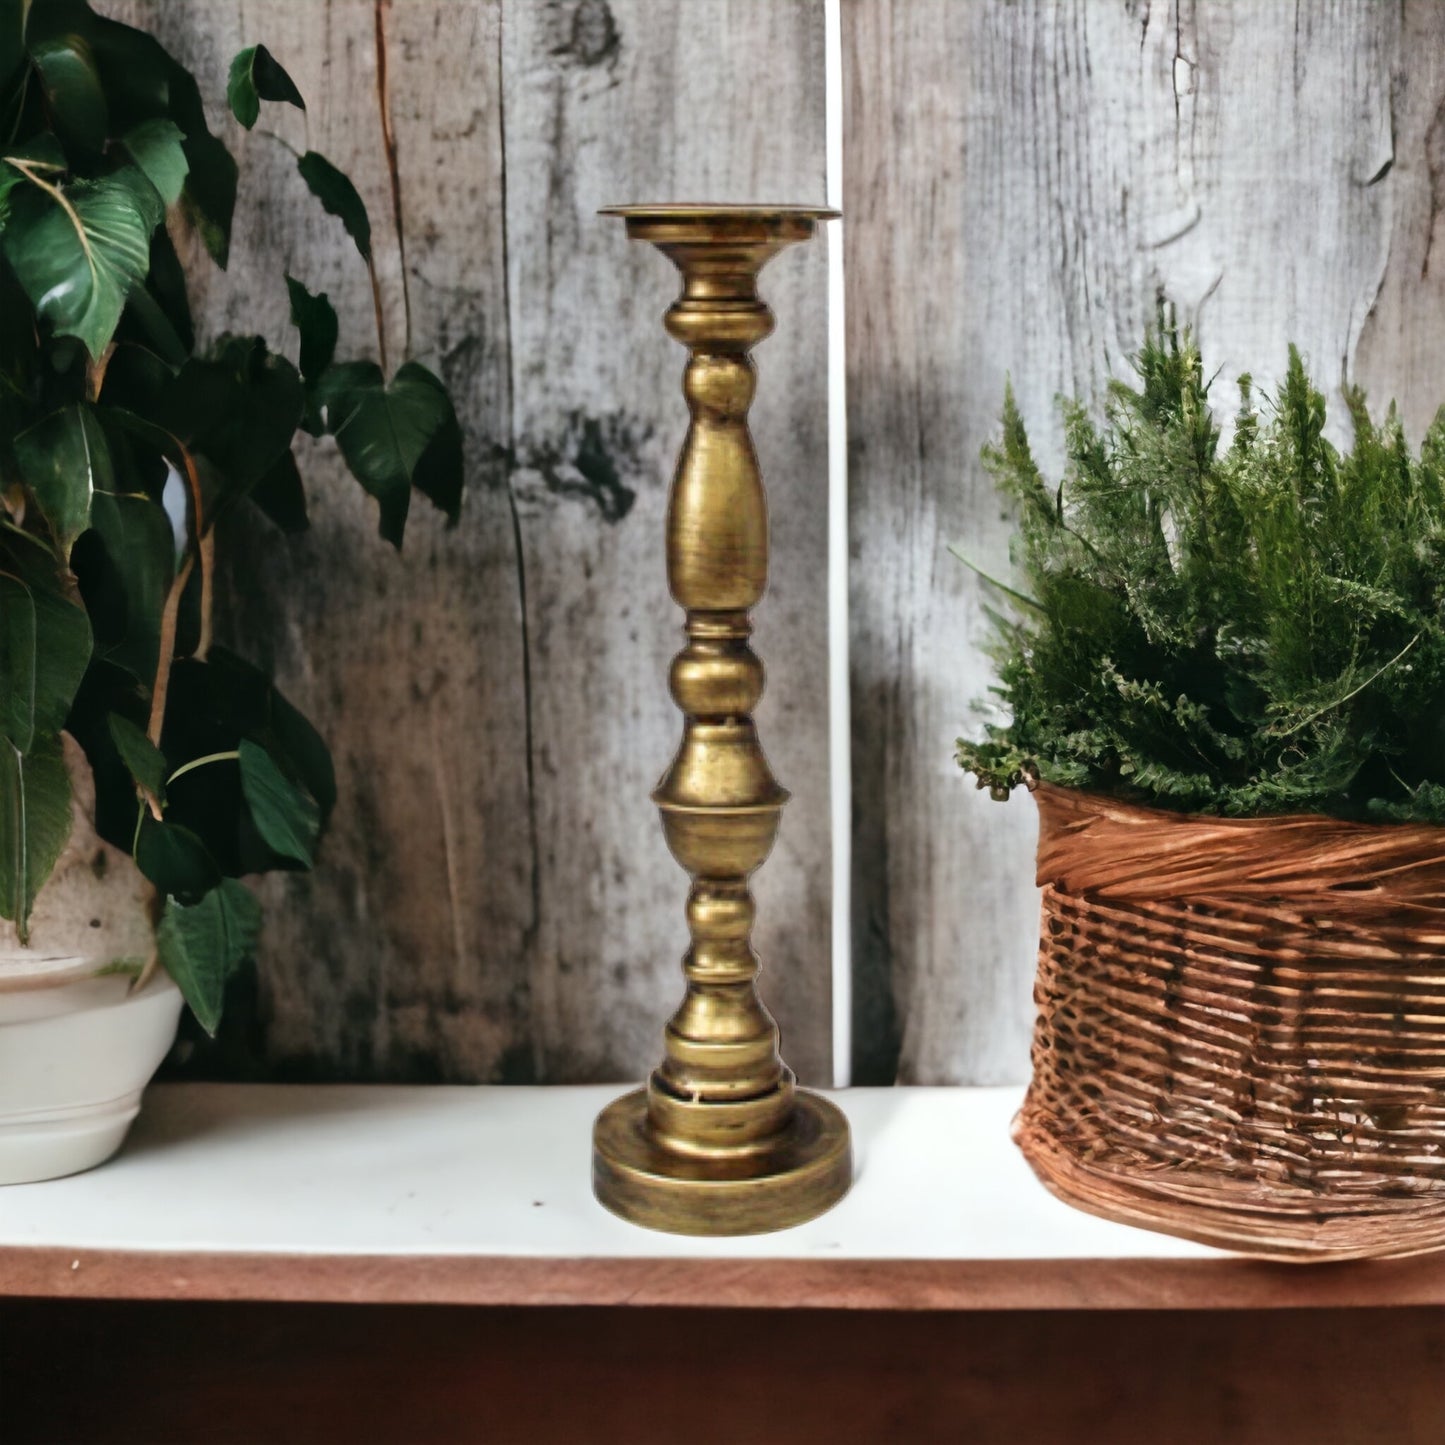 Candle Stick Holder Gold - The Renmy Store Homewares & Gifts 